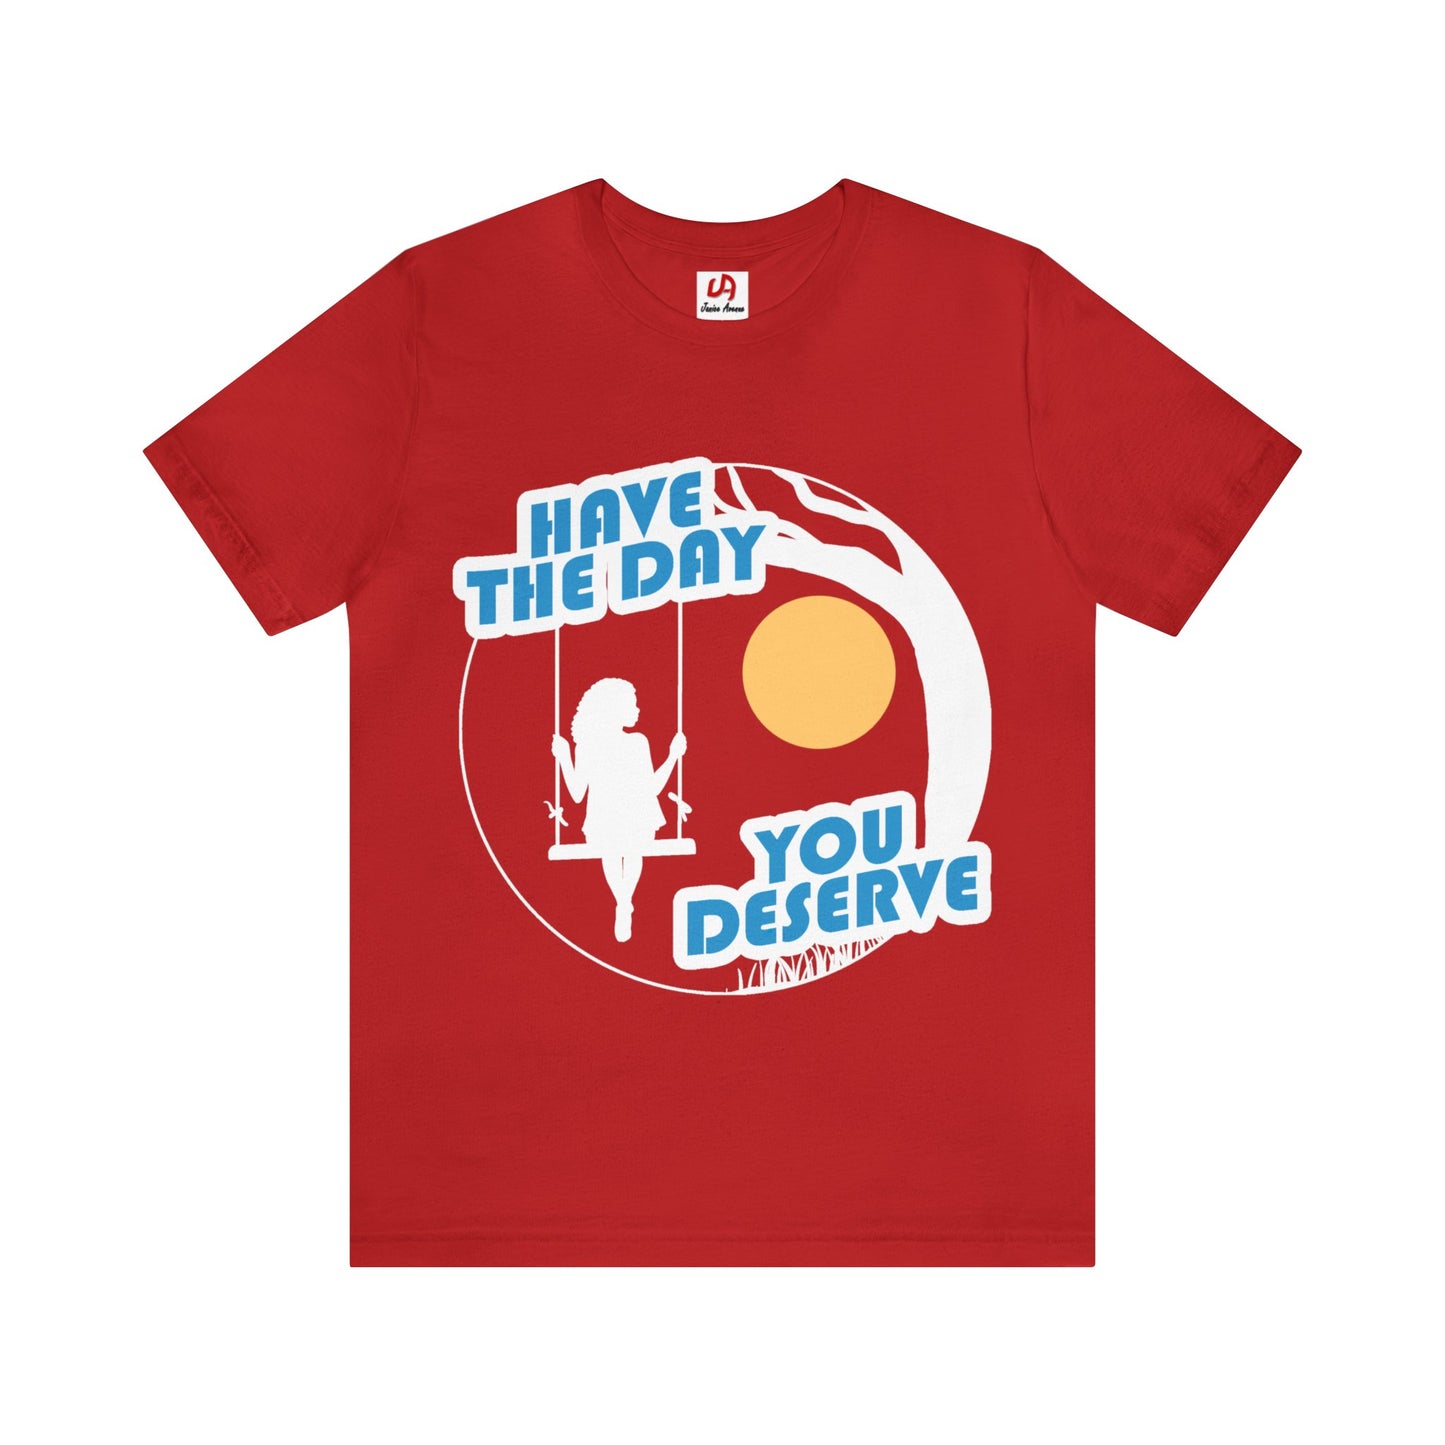 Have The Day You Deserve Shirt - White Text